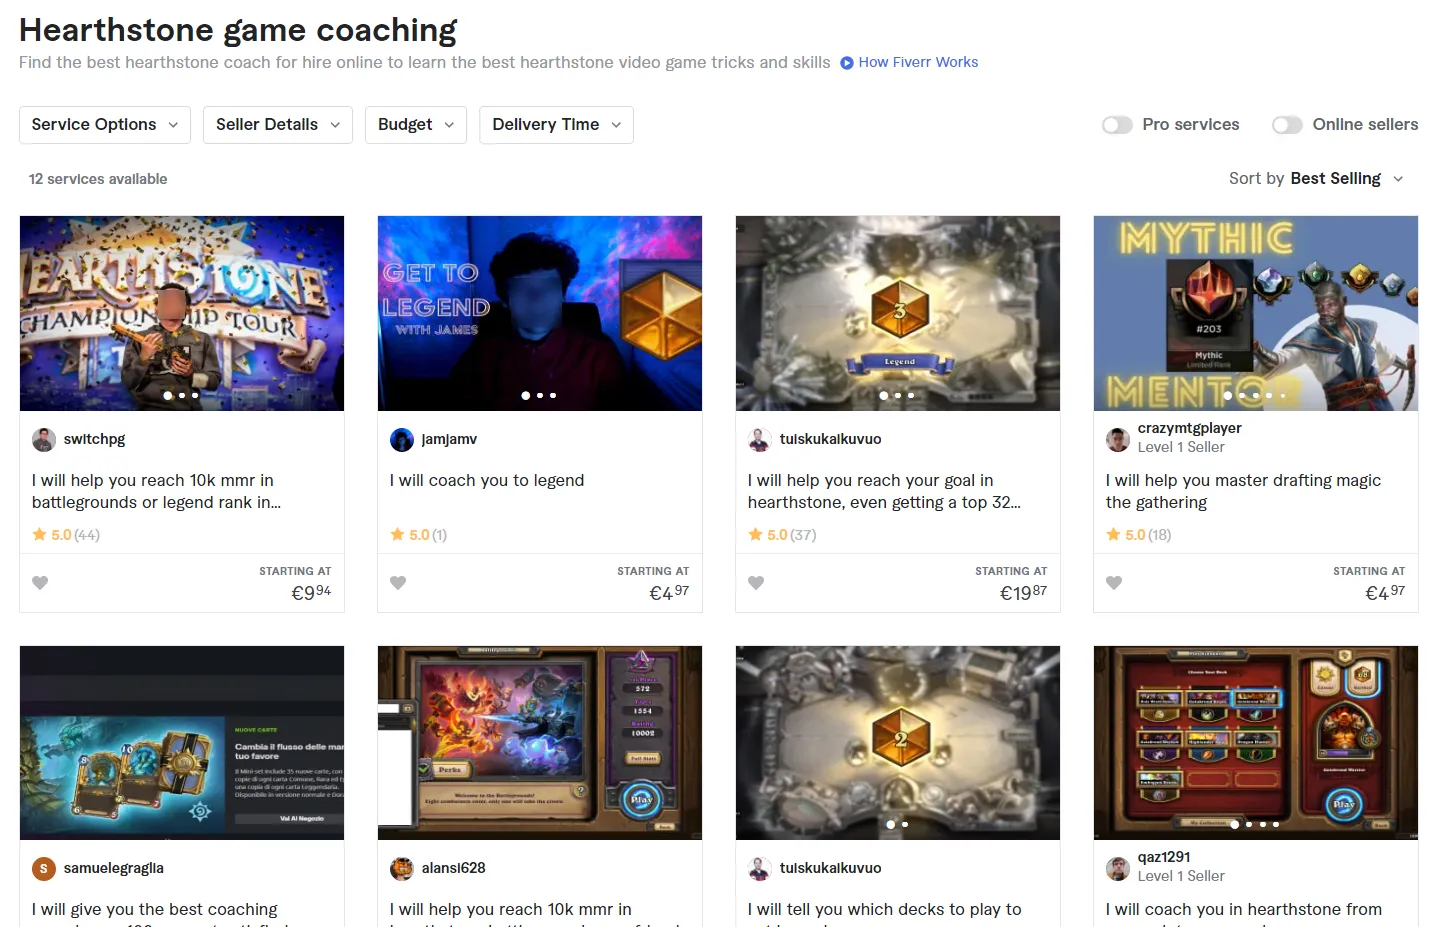 You can see how much money Hearthstone coaches can get per Fiverr gig.